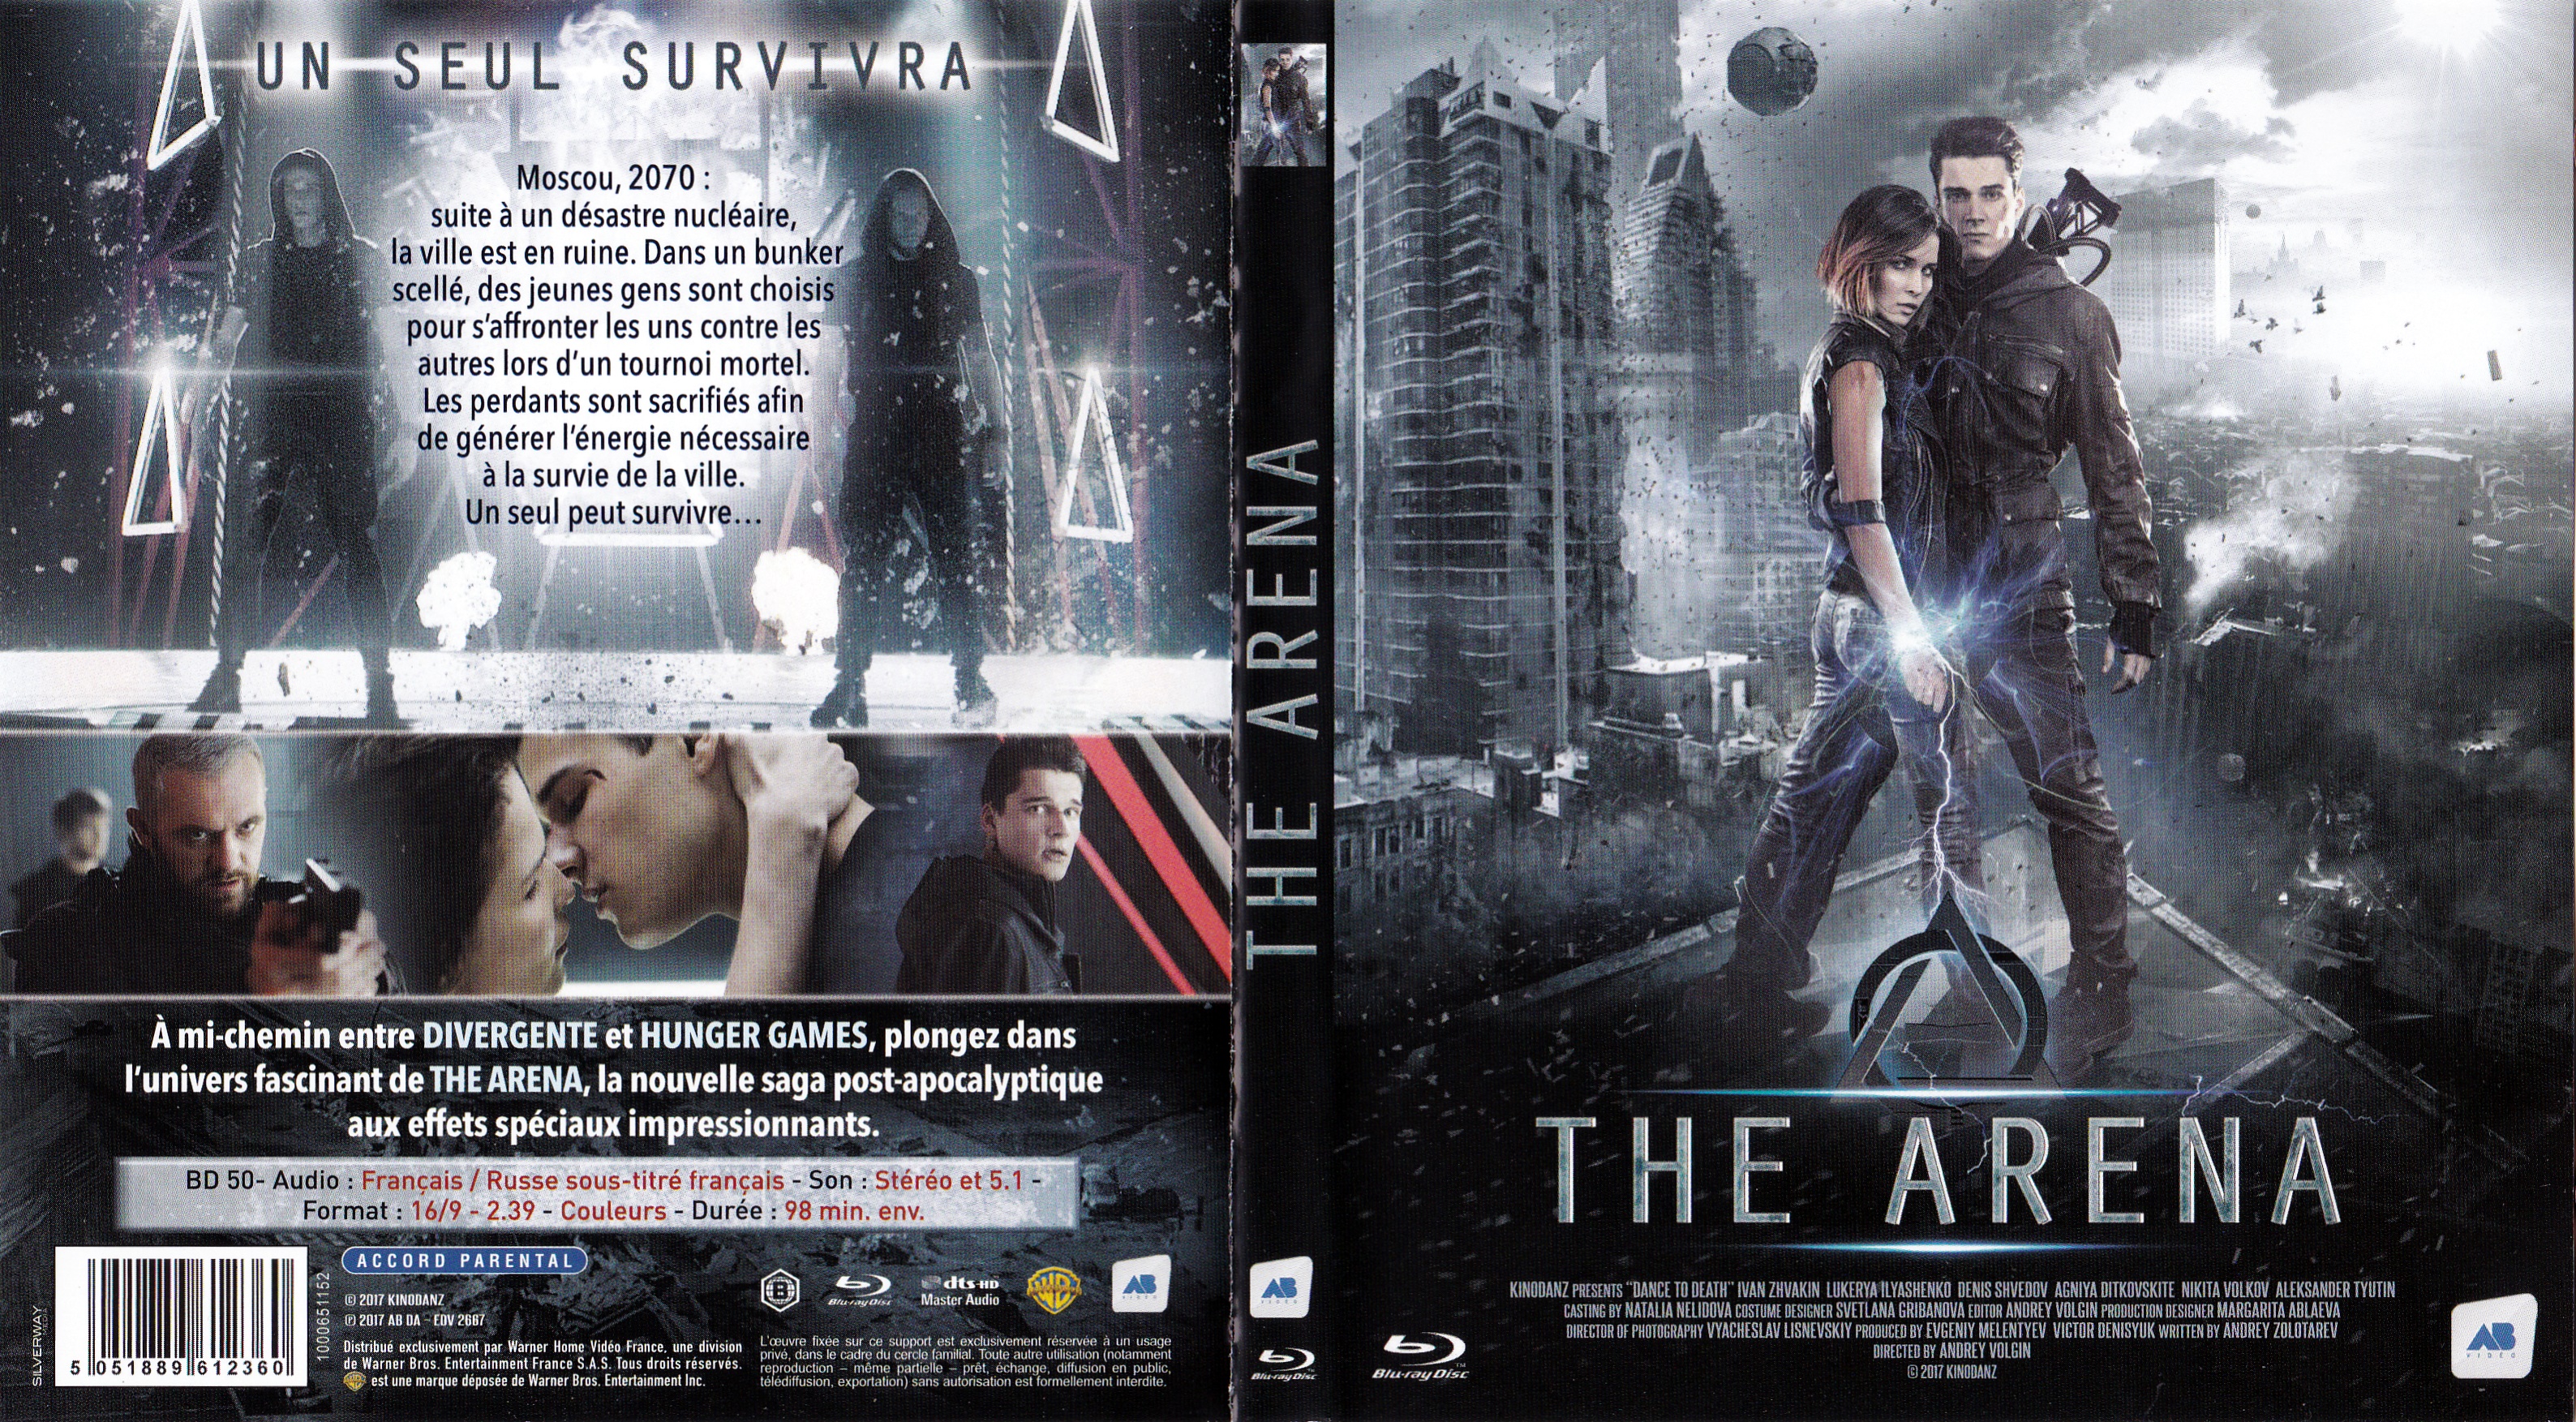 Jaquette DVD The arena (BLU-RAY)